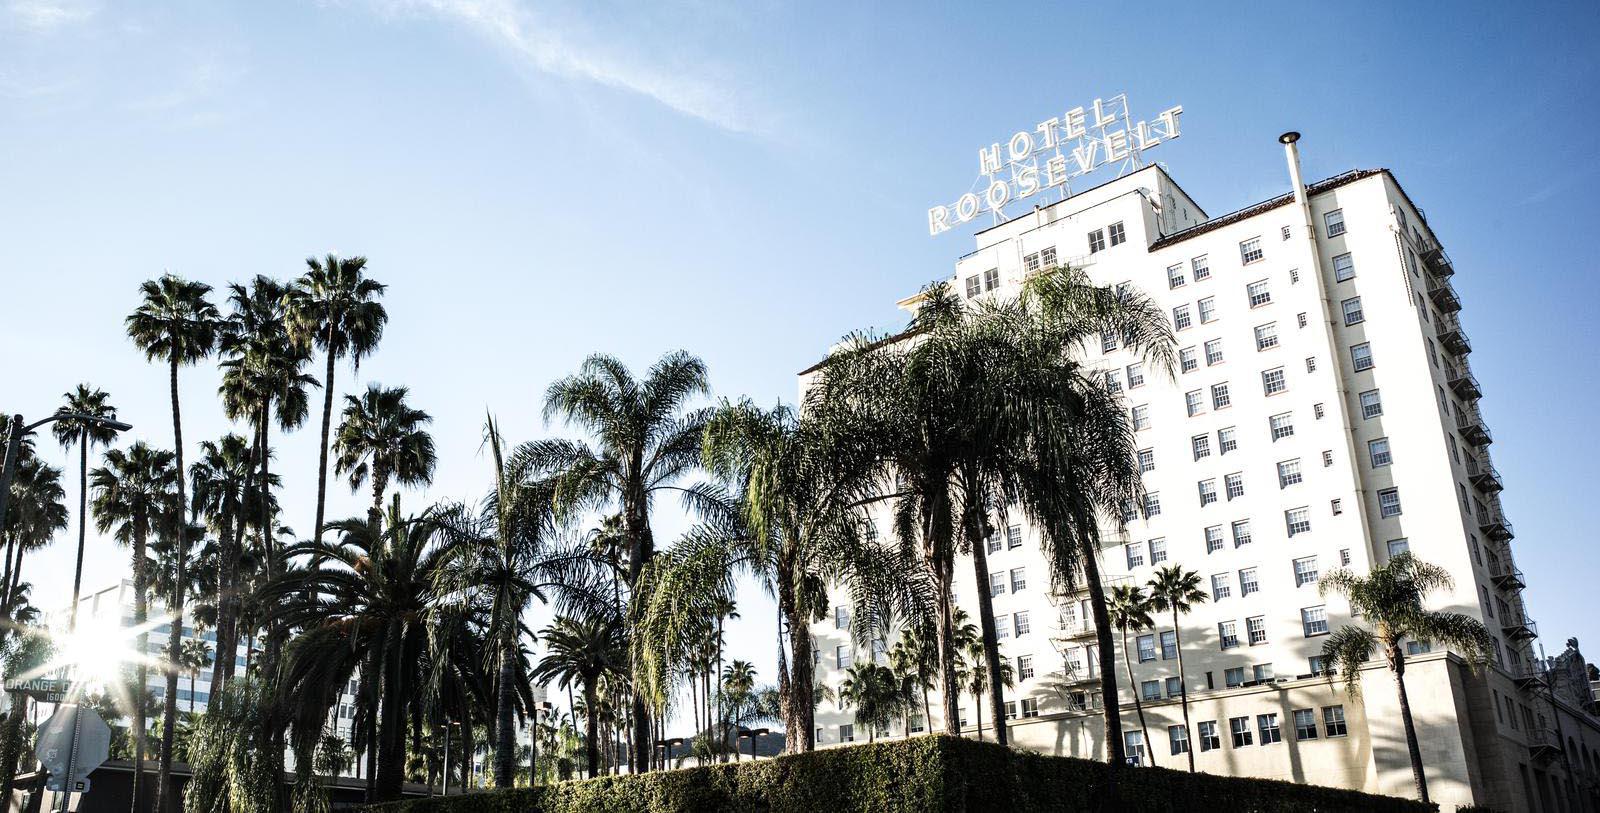 Image of Event Space The Hollywood Roosevelt, 1927, Member of Historic Hotels of America, in Hollywood, California, Experience